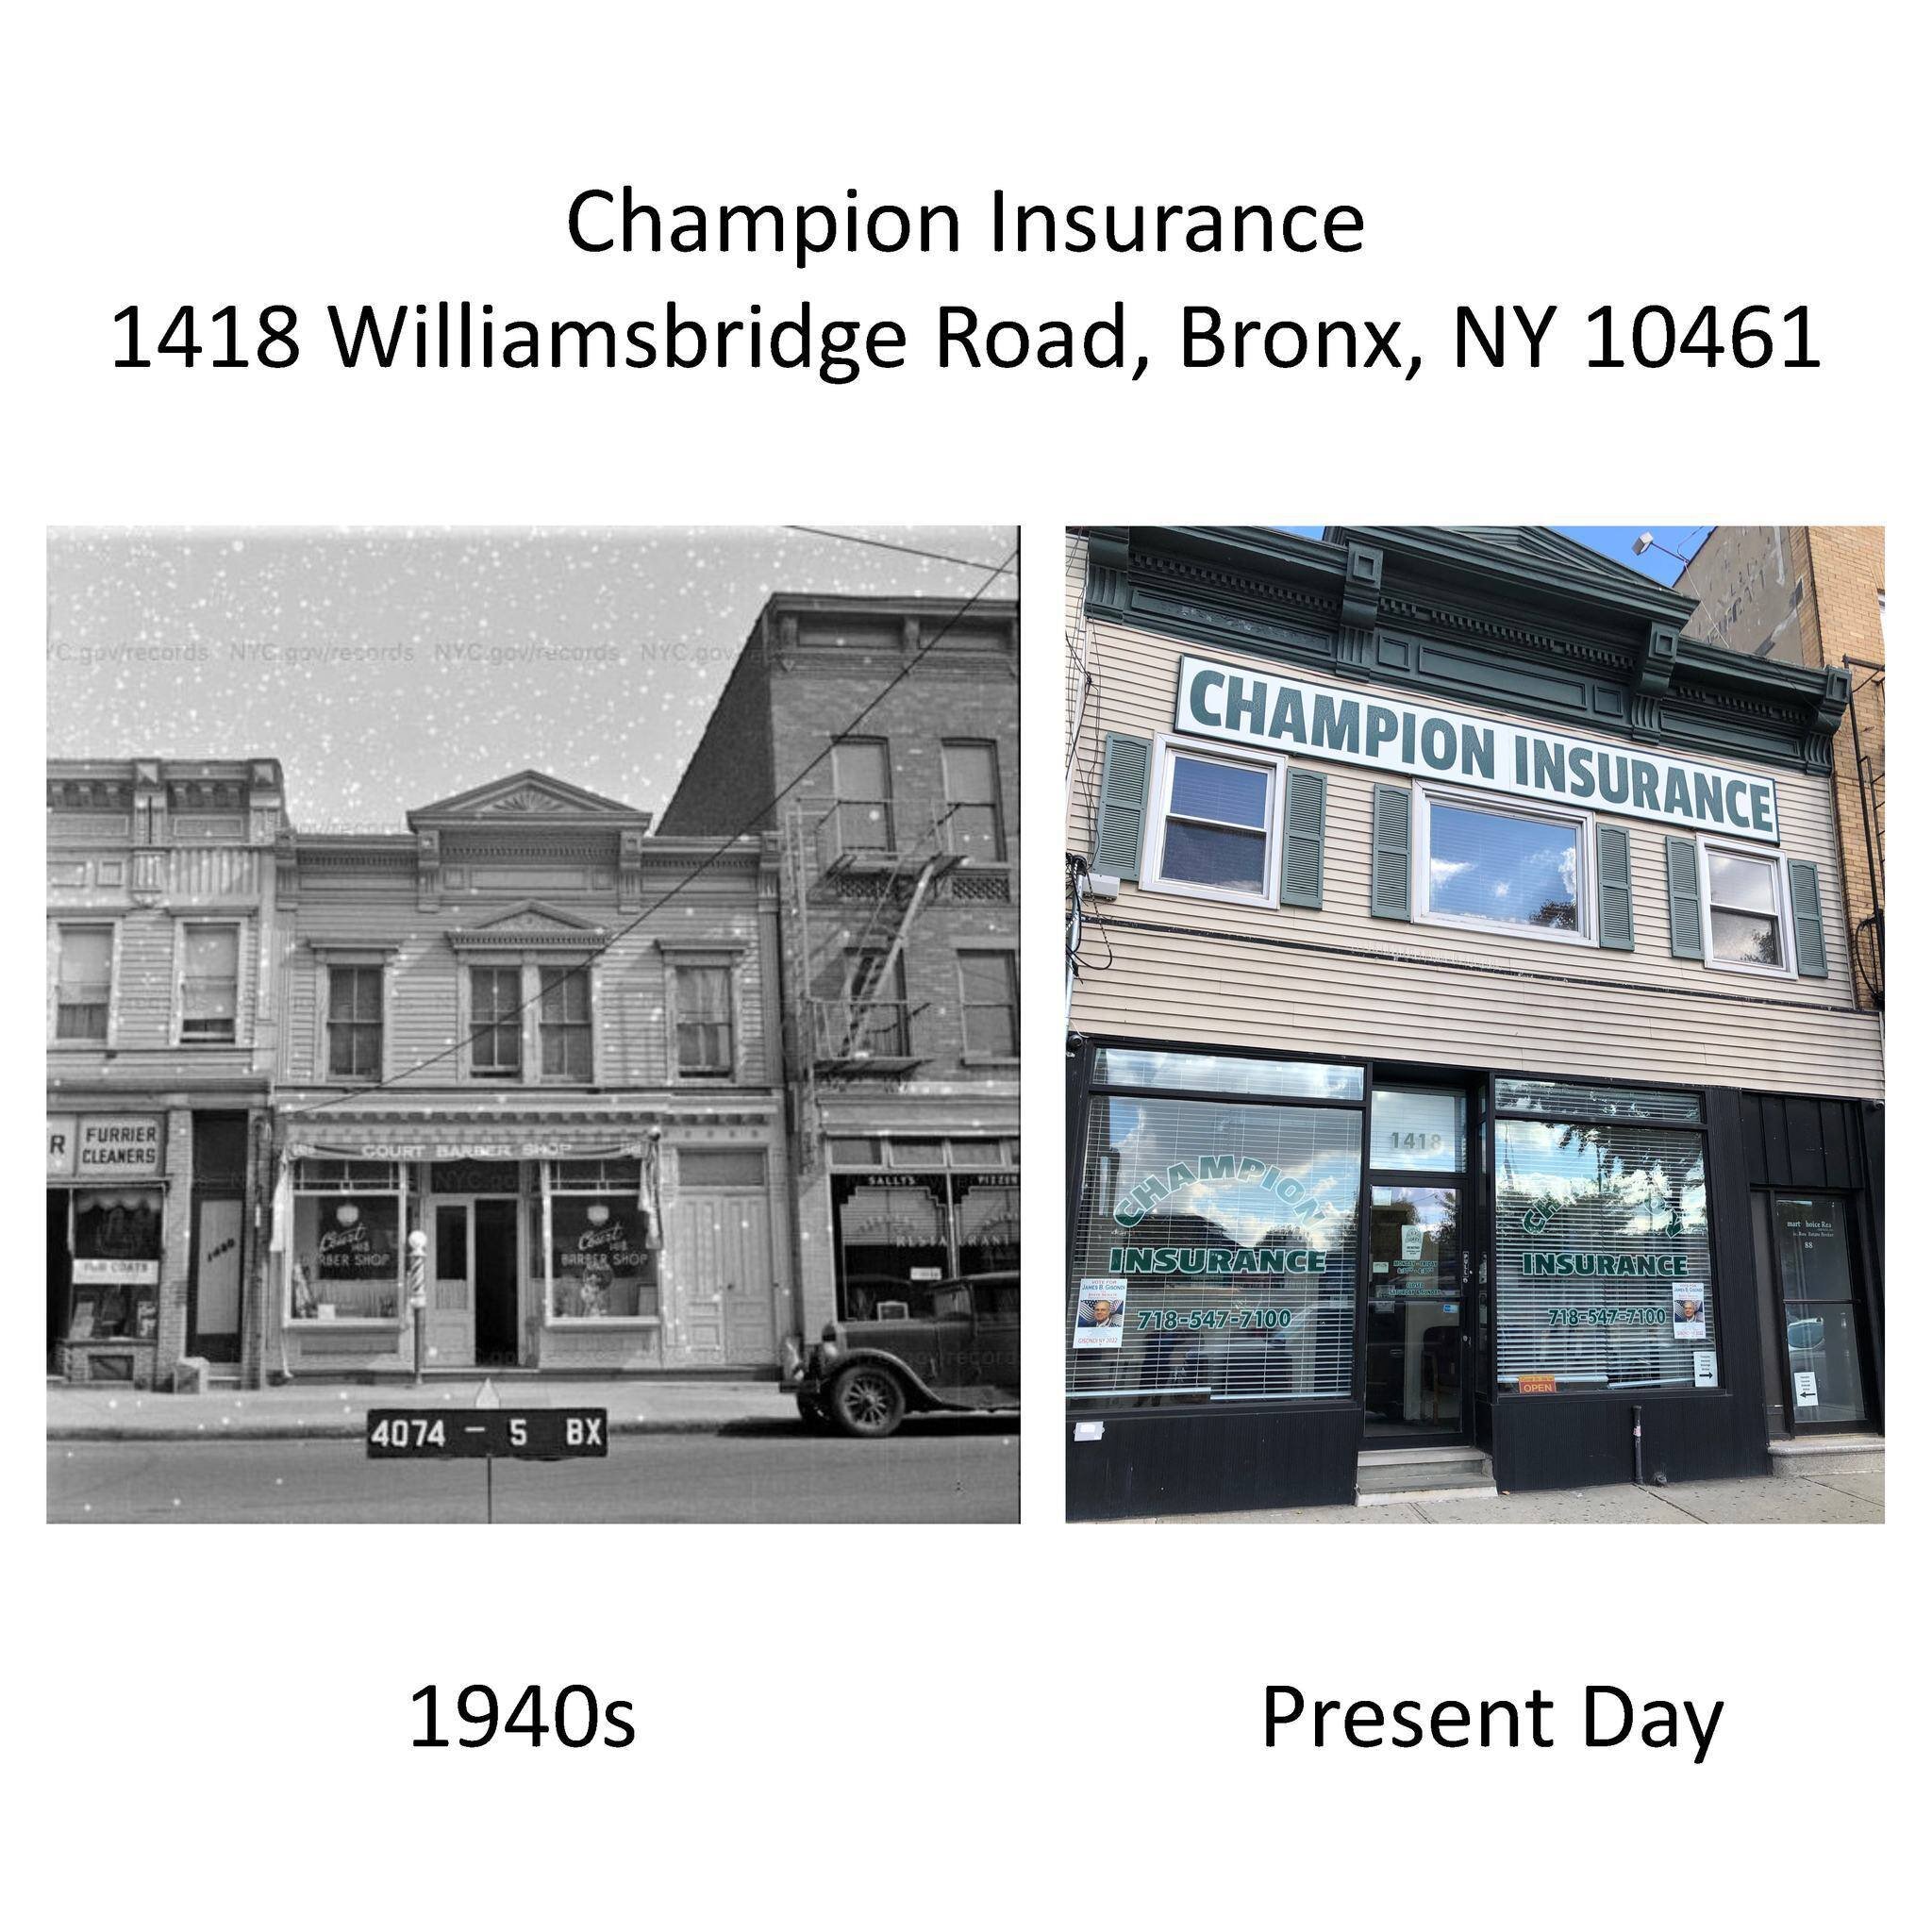 Featured in our May issue of The Square Times, Champion Insurance, which specializes in Home, Auto and Business Insurance, is located at 1418 Williamsbridge Road. One of our friends, Thomas X Casey of The East Bronx History Forum, provided this wonde